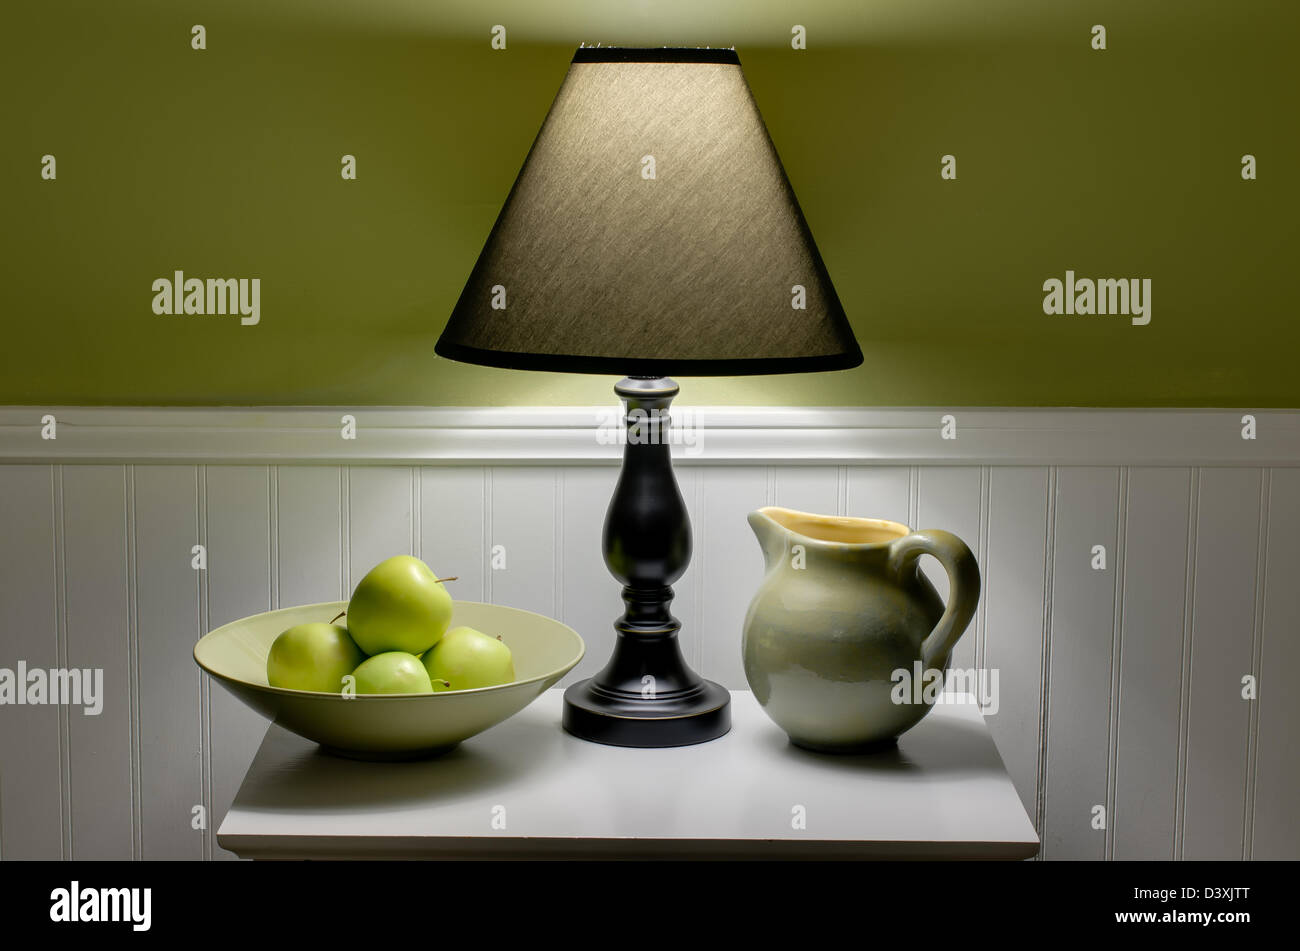 Bowl of green apples, lamp and pitcher on table. Scene is illuminated only by soft light from lamp. Stock Photo